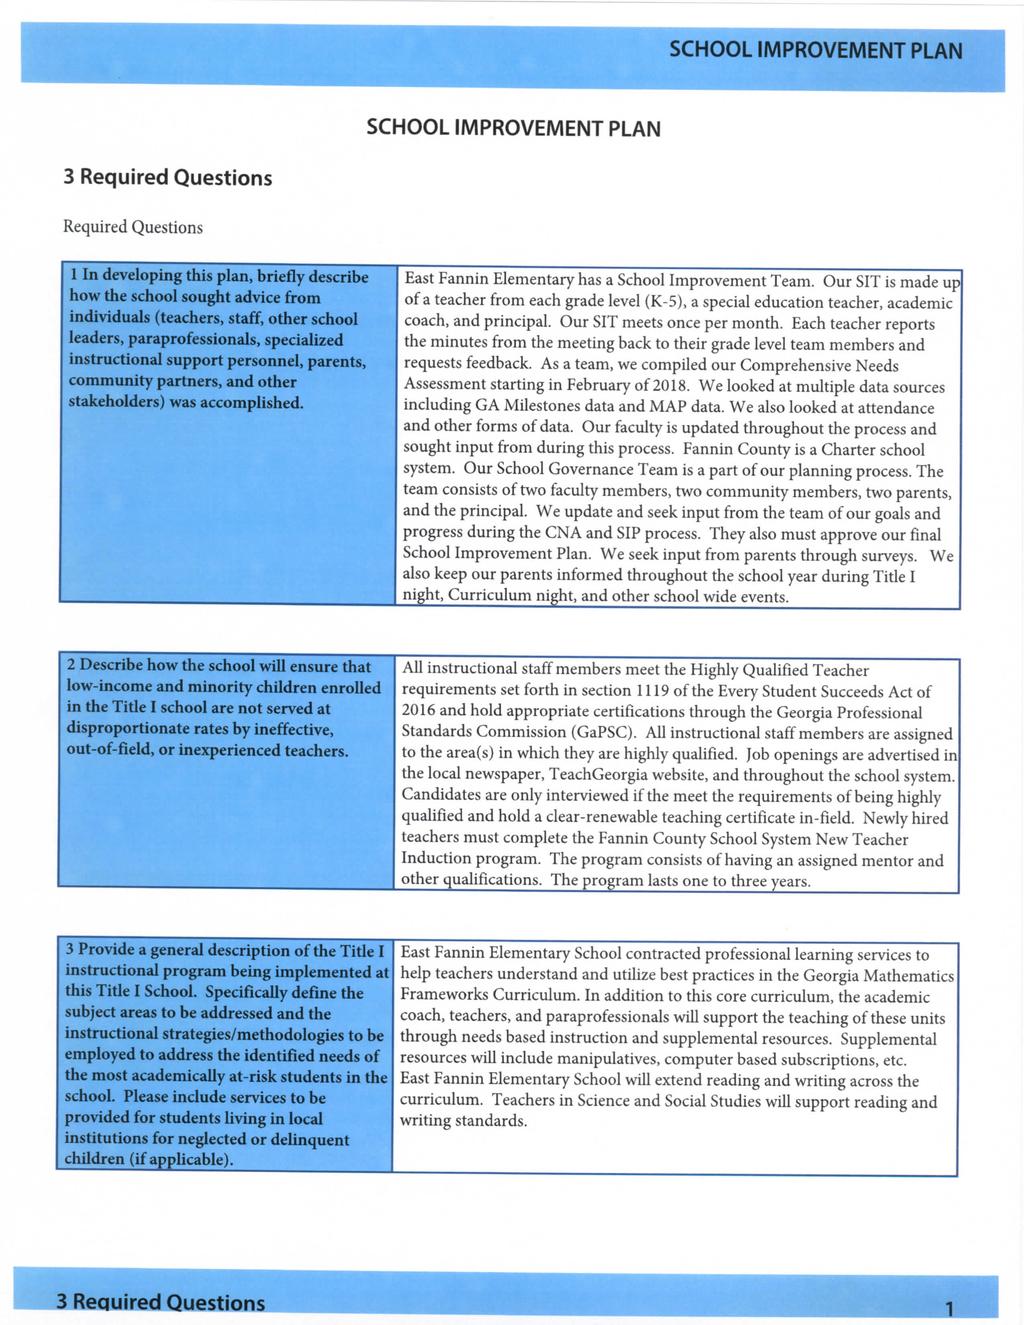 SCHOOL IMPROVEMENT PLAN SCHOOL IMPROVEMENT PLAN 3 Required Questions Required Questions 1 In developing this plan, briefly describe how the school sought advice from individuals (teachers, staff,